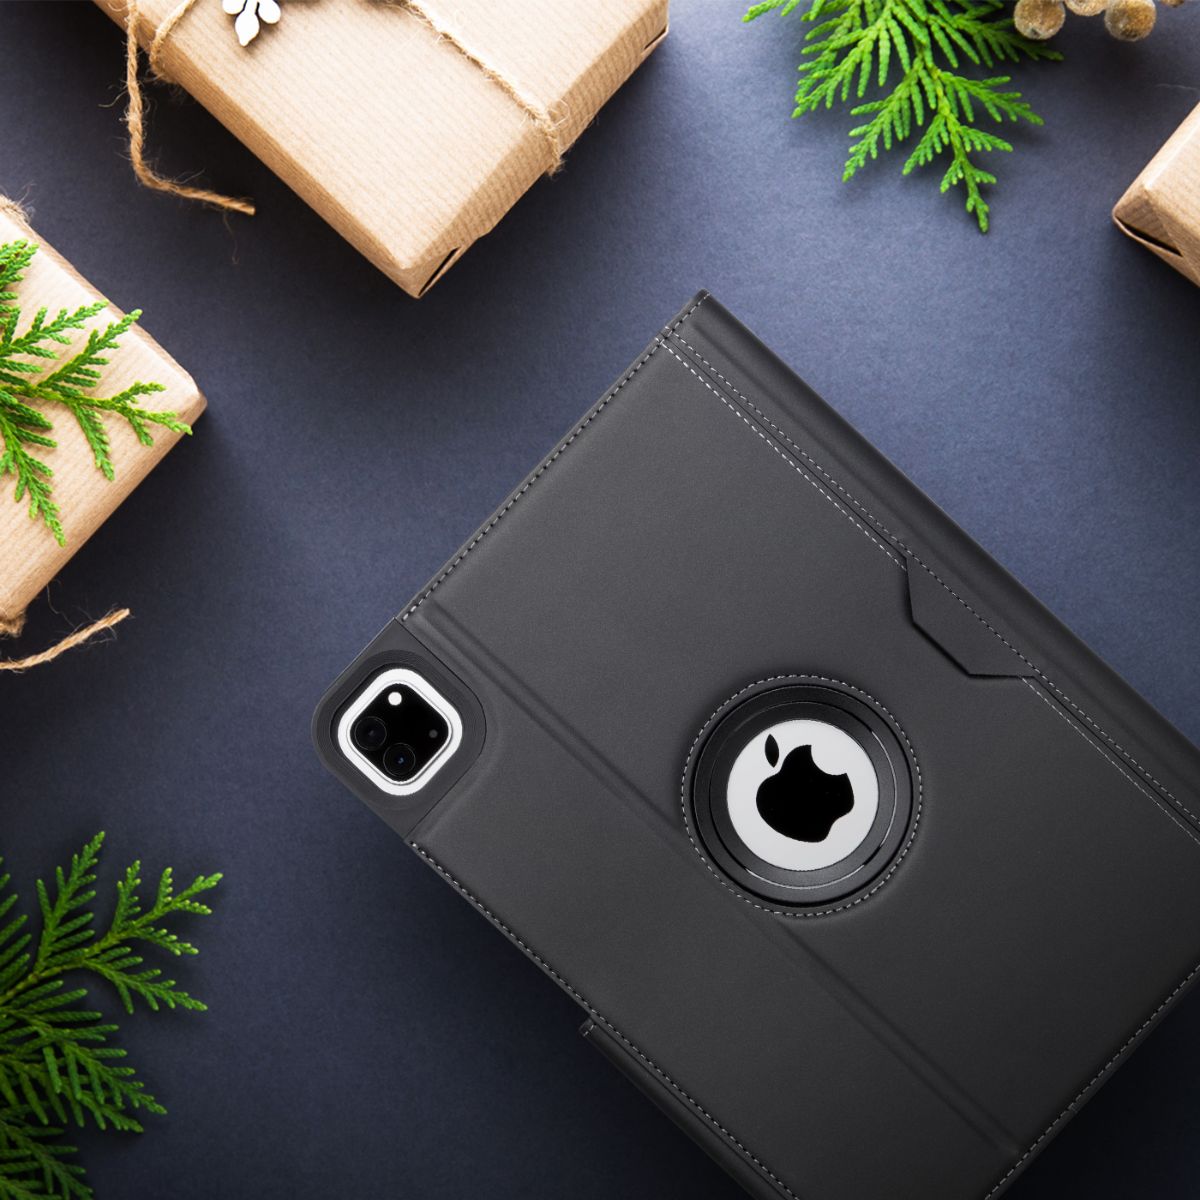 Unique Tech Gifts for the 2020 Holiday Season